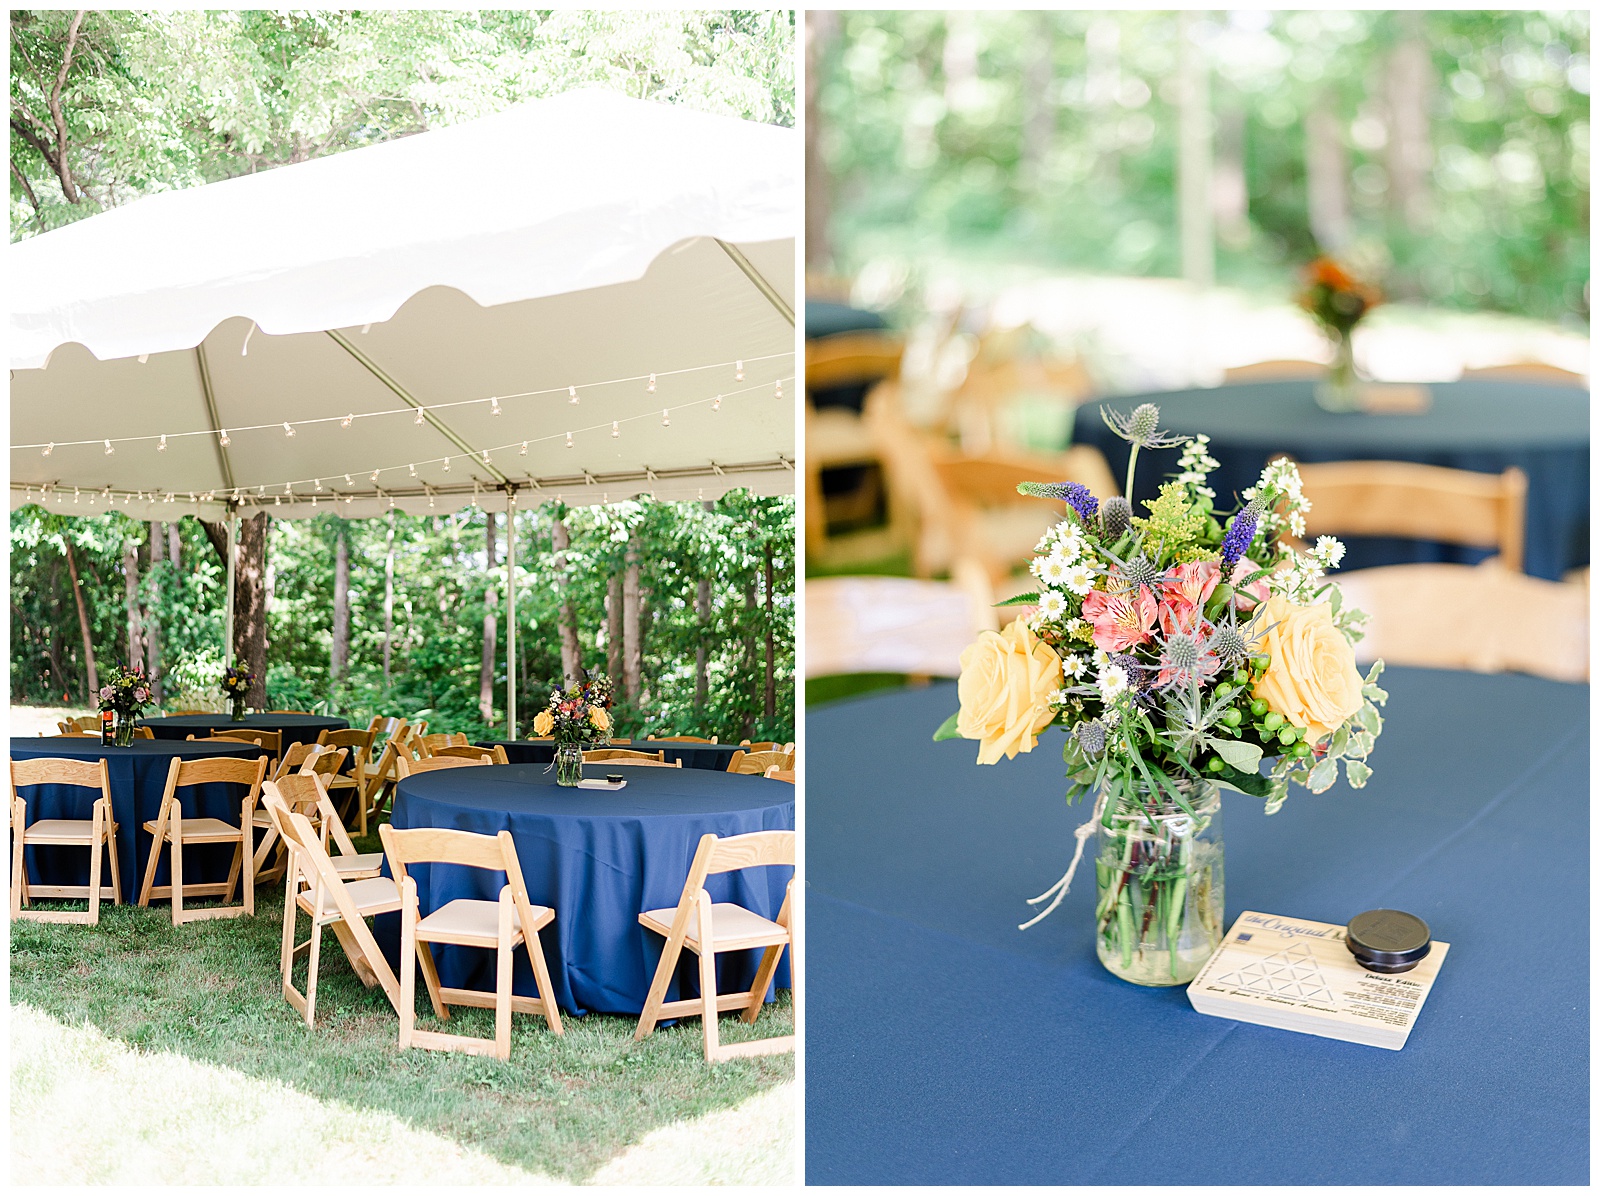 Blue Themed Colorful Floral Outdoor Table Setting and Fine China from Outdoorsy Summer Wedding at North Carolina Lakehouse in the Mountains | check out the full wedding at KevynDixonPhoto.com